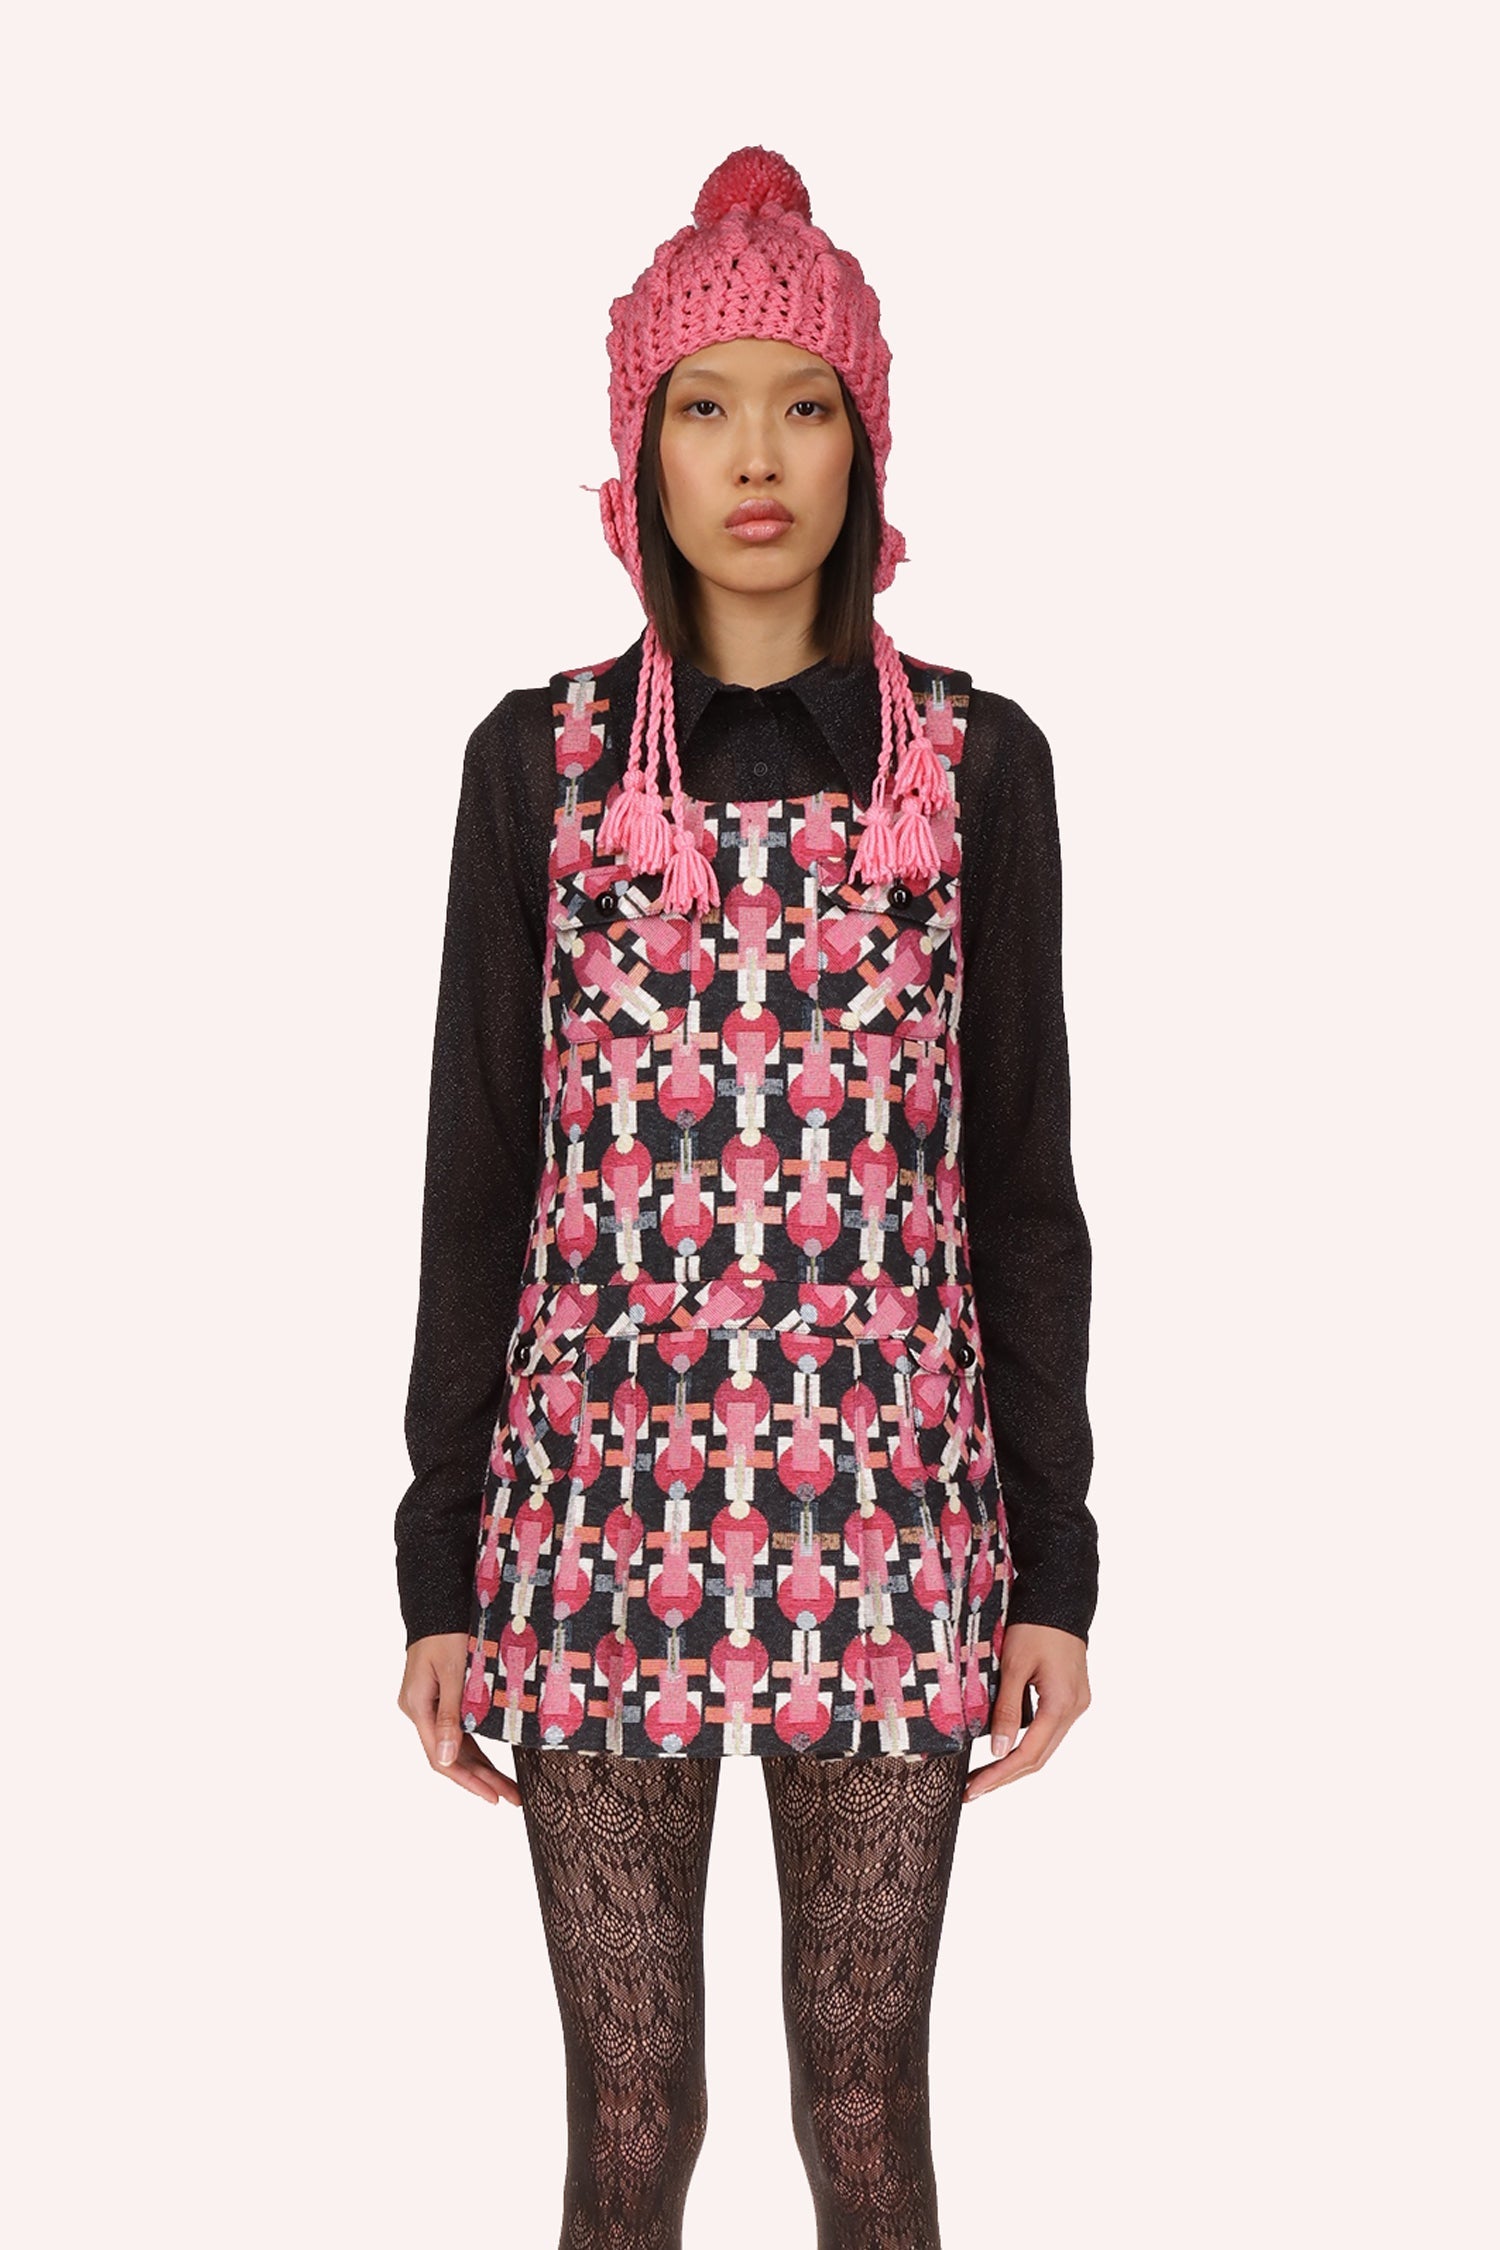 Geo Jacquard Pleated Dress Rose Multi, floral pattern shades of, light pink and red on black, sleeveless dress, 2-straps